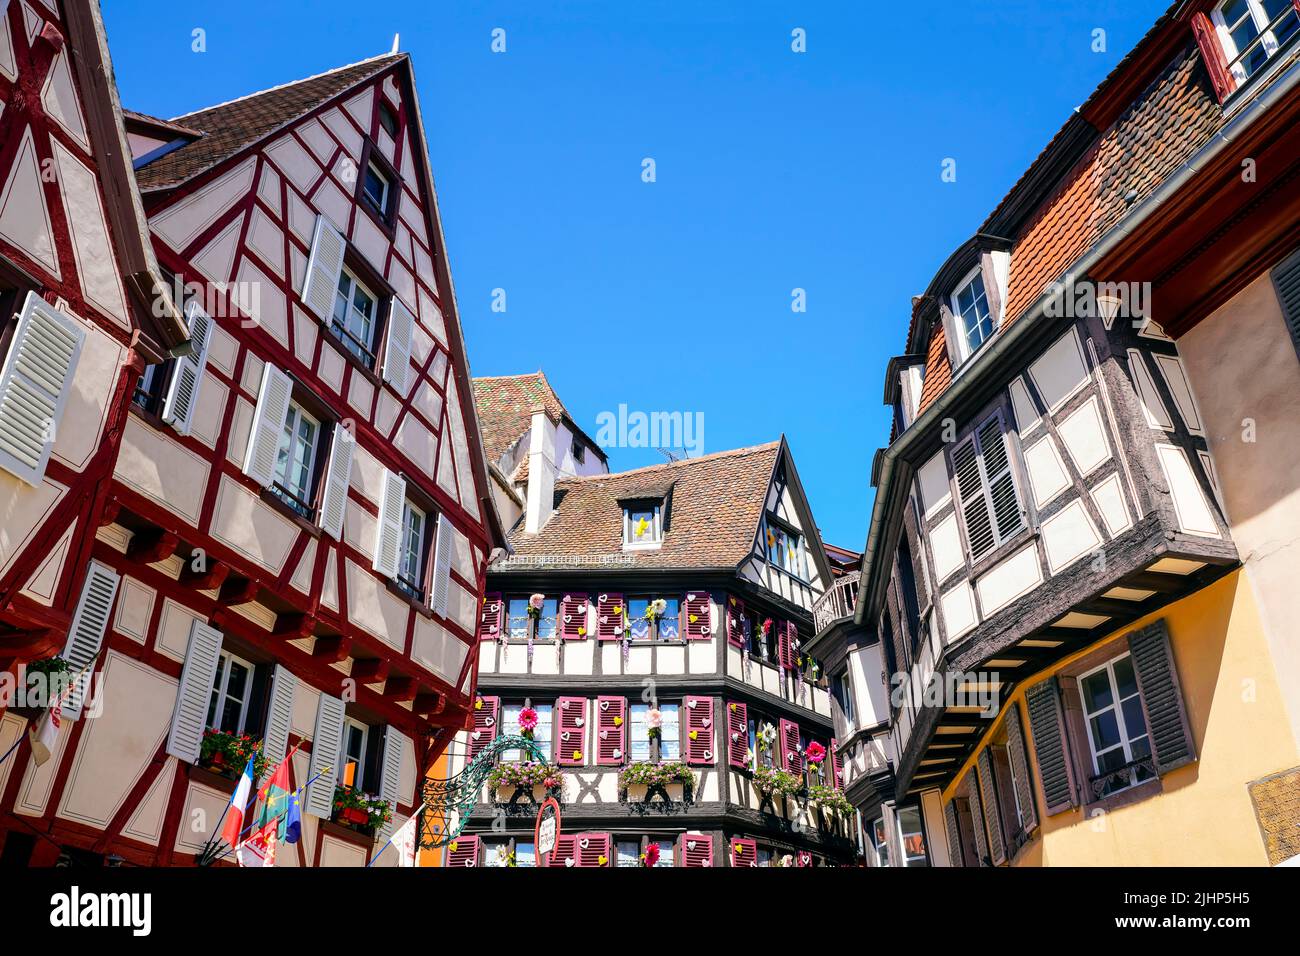 Colorful traditional Alsatian houses by Rue des Marchands in the historic town of Colmar, Alsace, France. Stock Photo